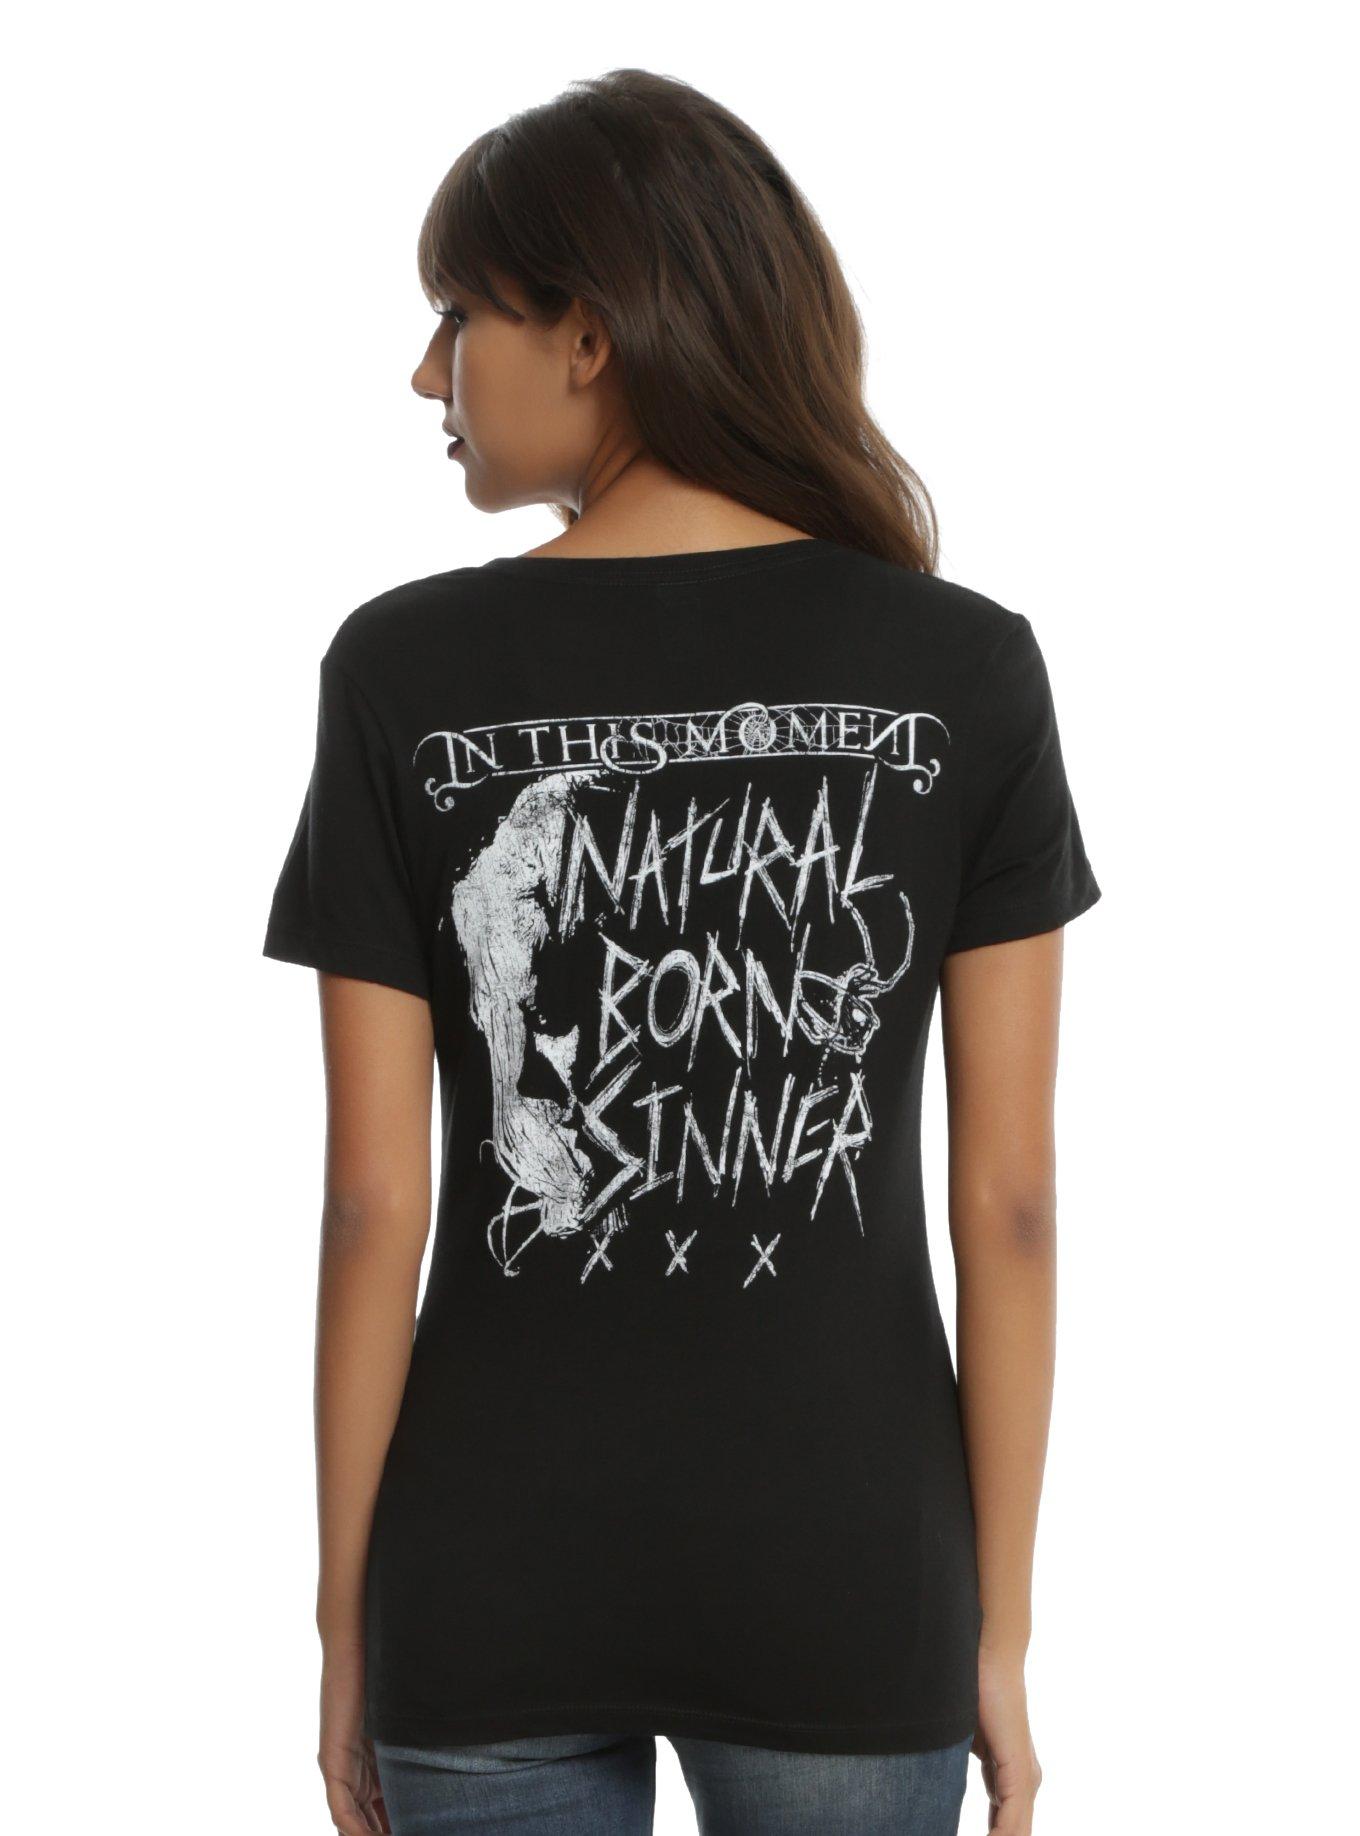 In This Moment Natural Born Sinner Girls T-Shirt